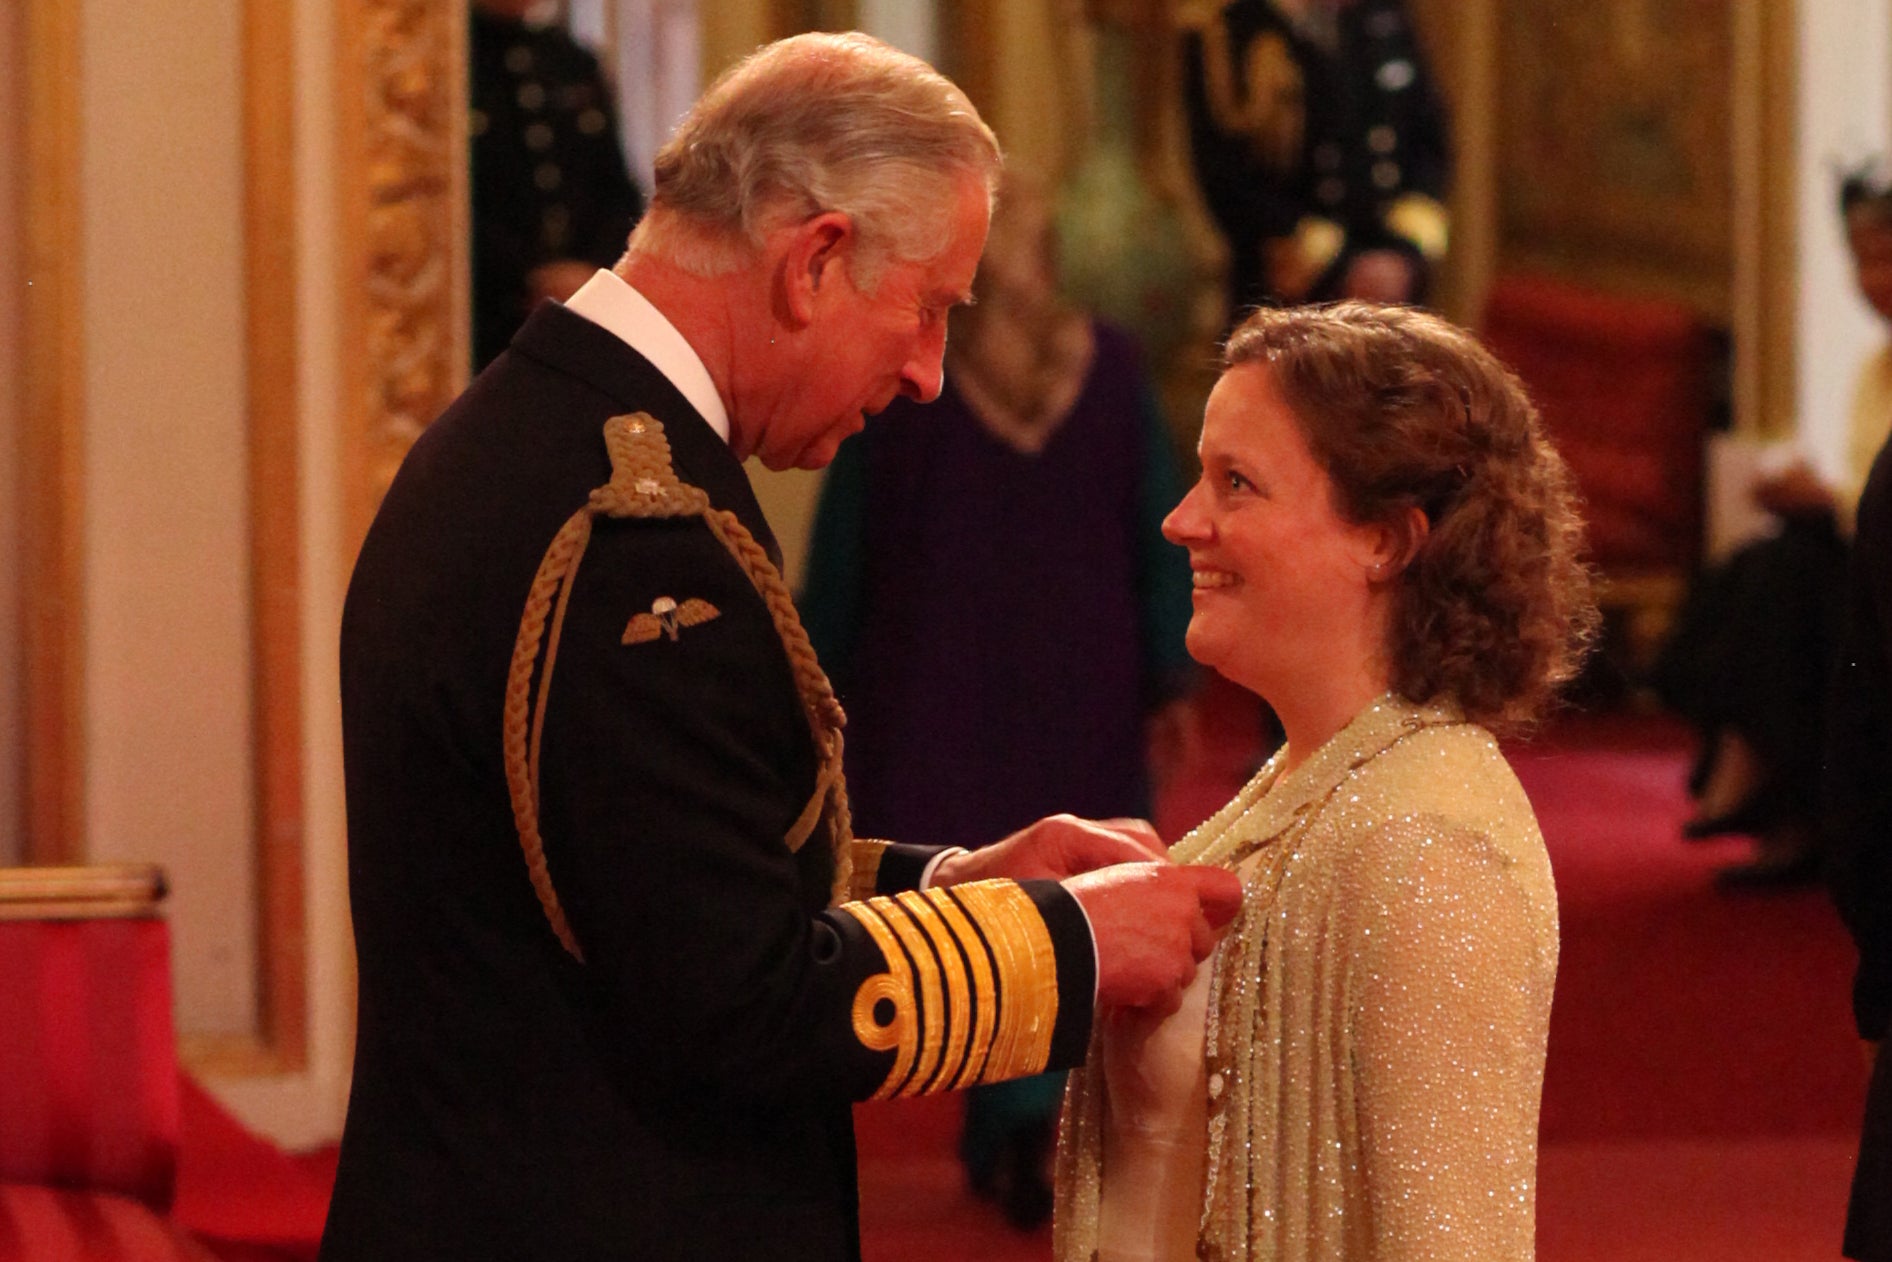 Briggs was awarded an OBE in 2014 for her work with hostage families